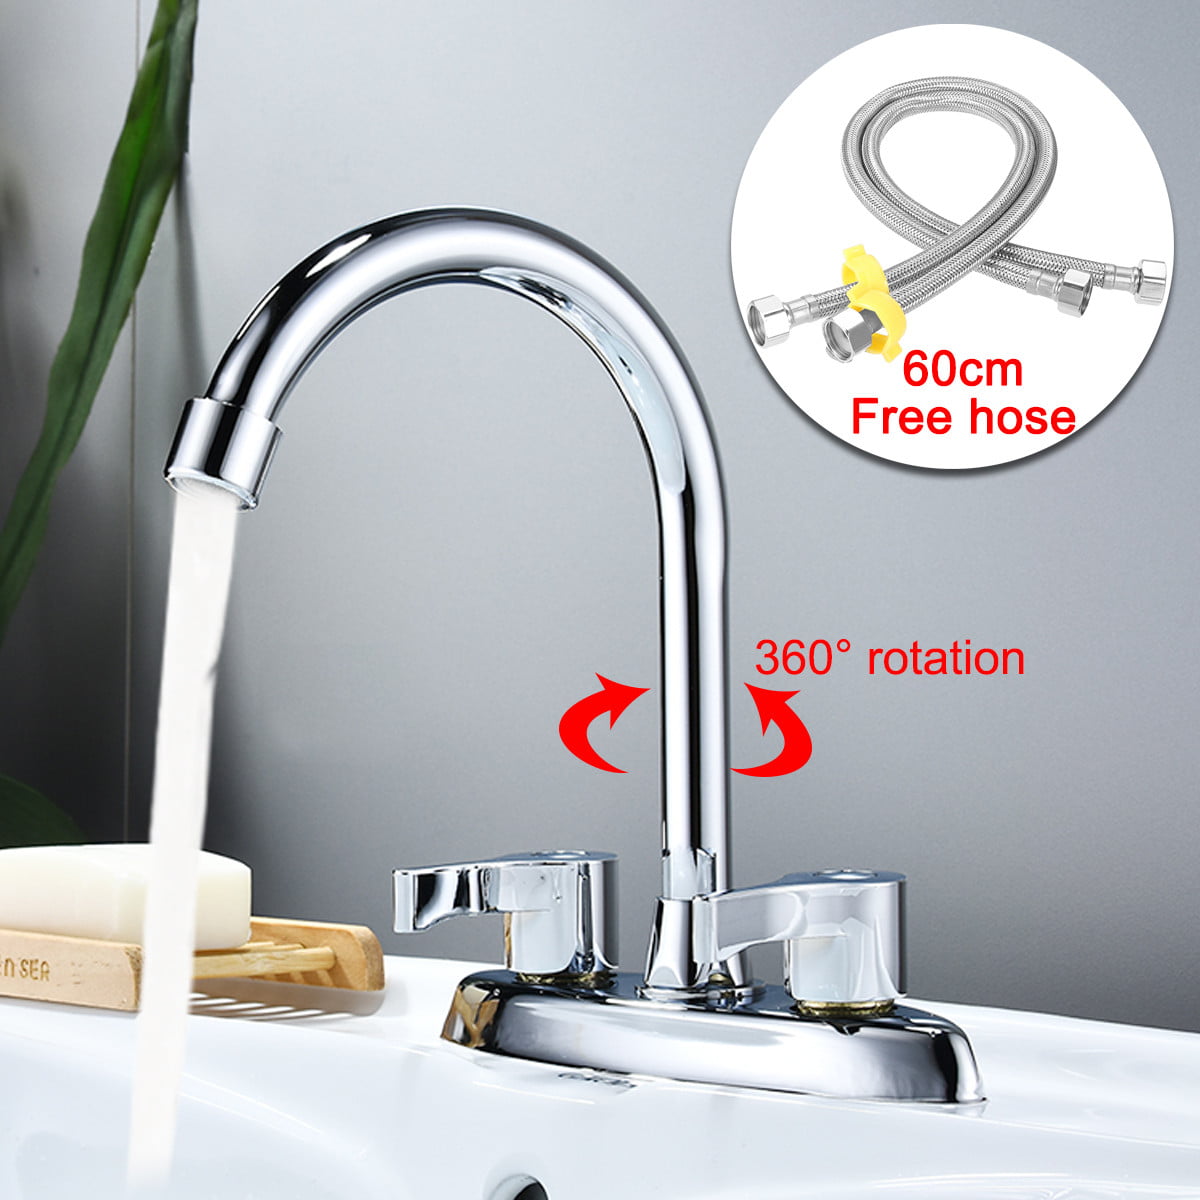 Double Holes and Handles Kitchen Faucet Hot Cold Basin Sink Mixer Water Tap